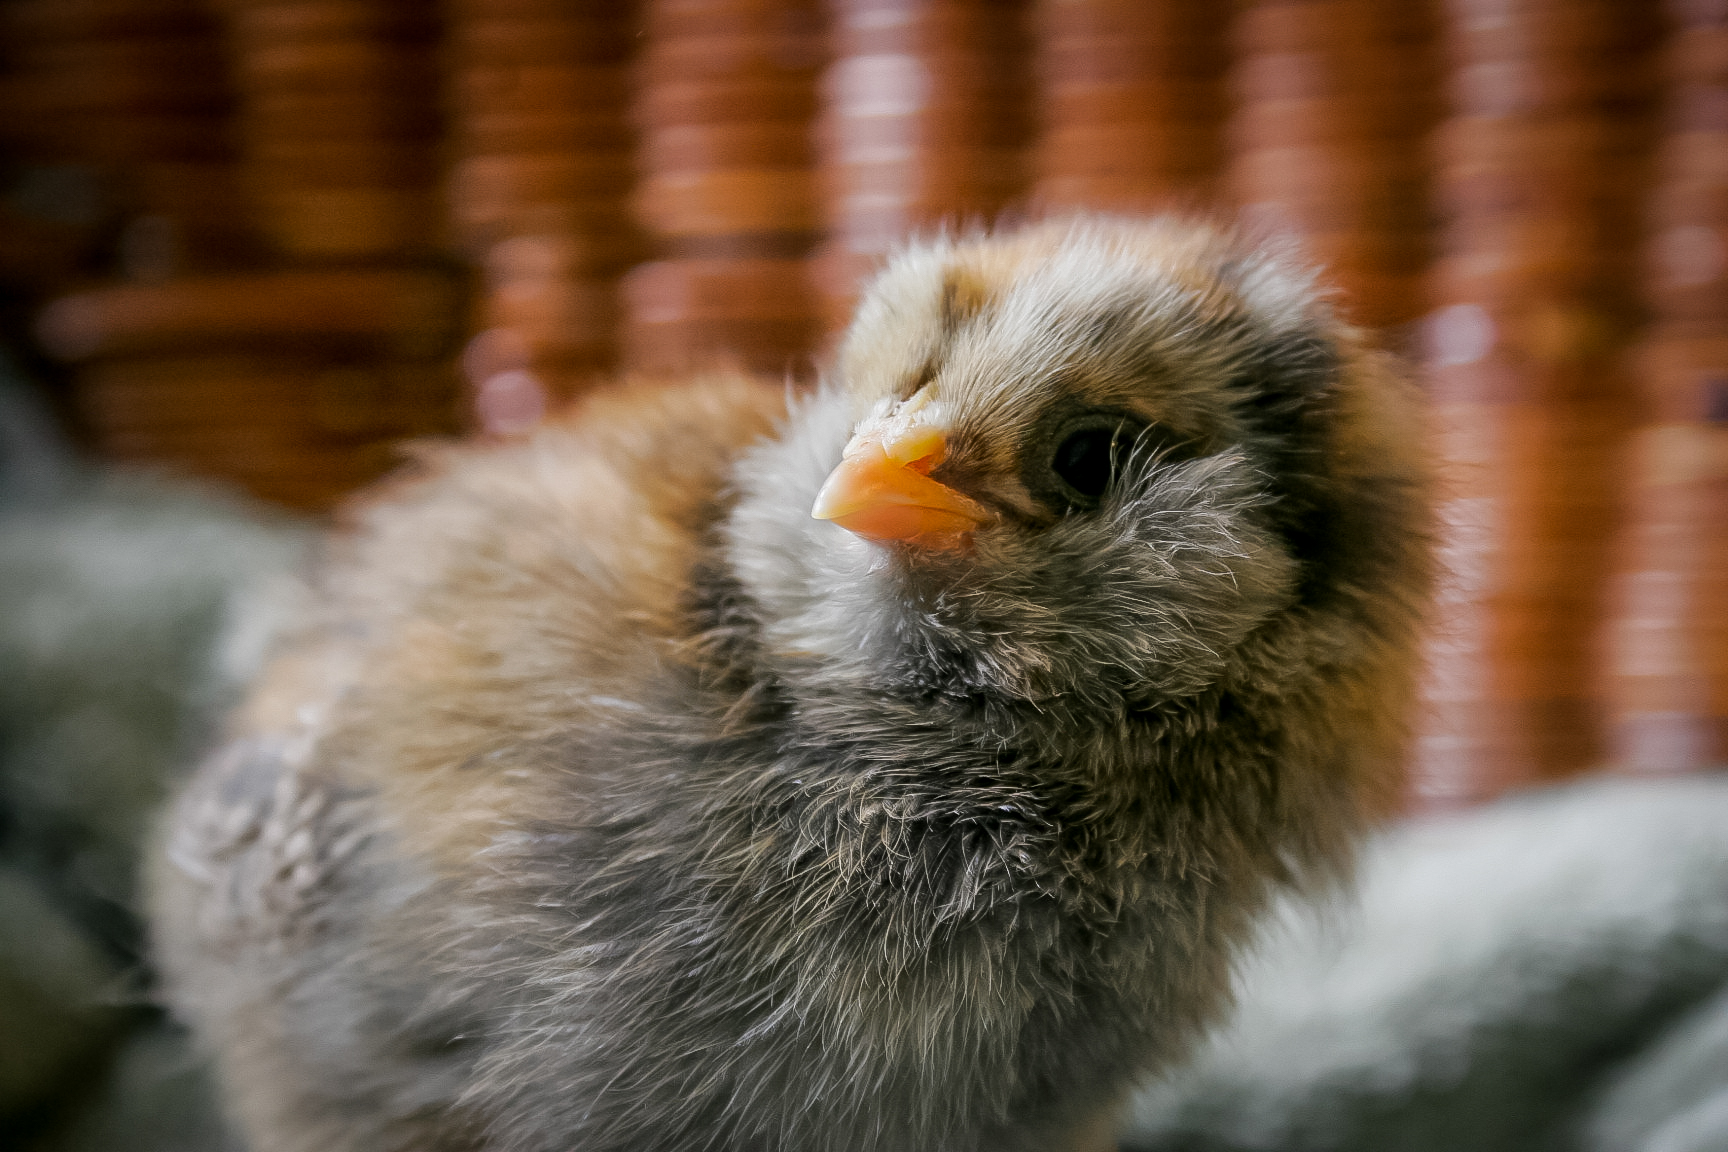 Our little Miss Molly--our fluffiest chick that does what she wants and hasn't a care in the world. (5 days old.)